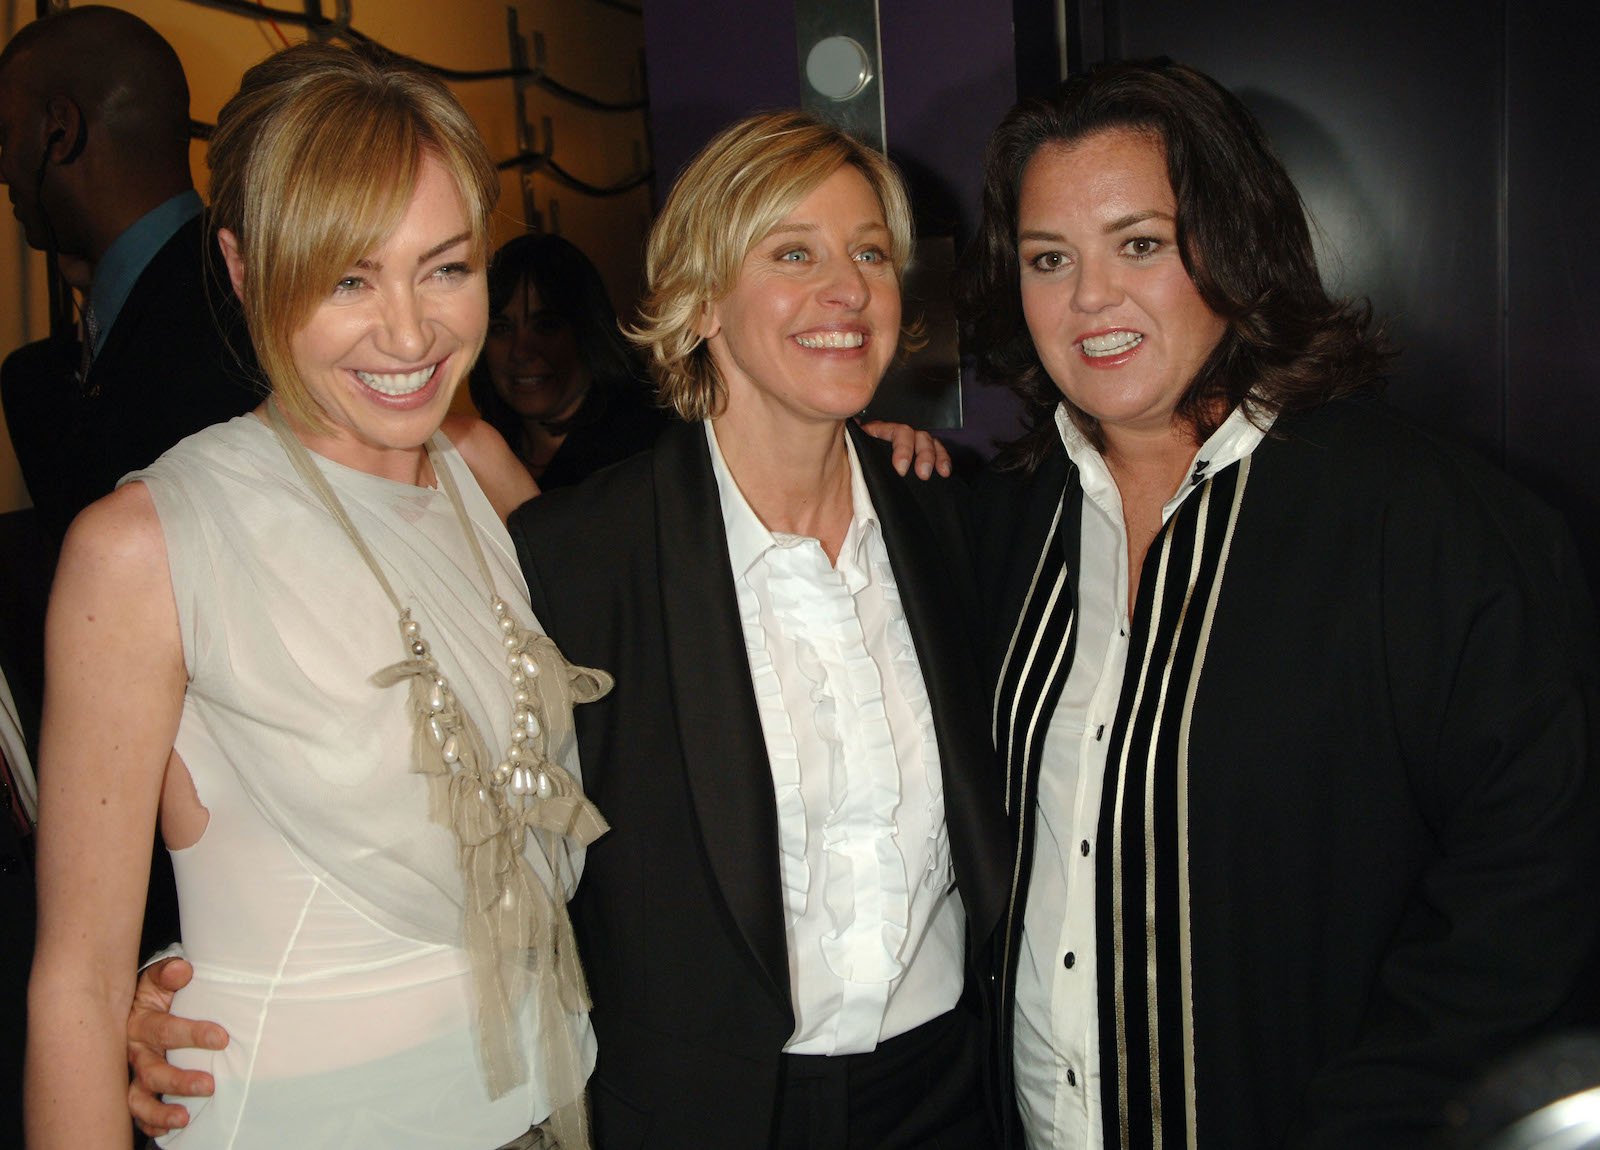 Portia de Rossi, Ellen DeGeneres, and Rosie O'Donnell stand together for a photo